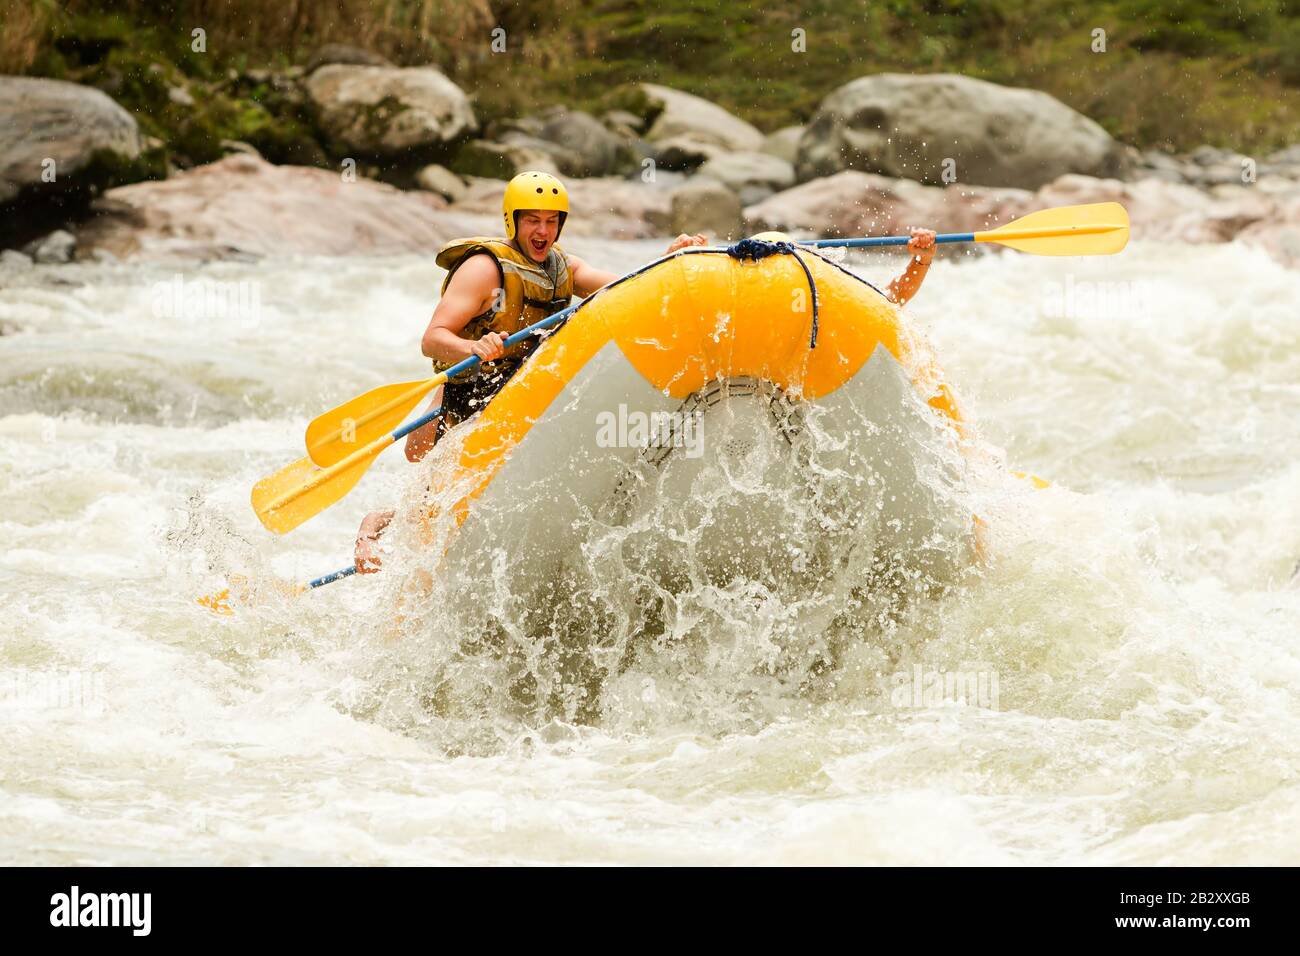 Partnership Of Mixed Visitor Human And Femininity With Guided By Professional Pilot On Whitewater Waterway Rafting In Ecuador Stock Photo